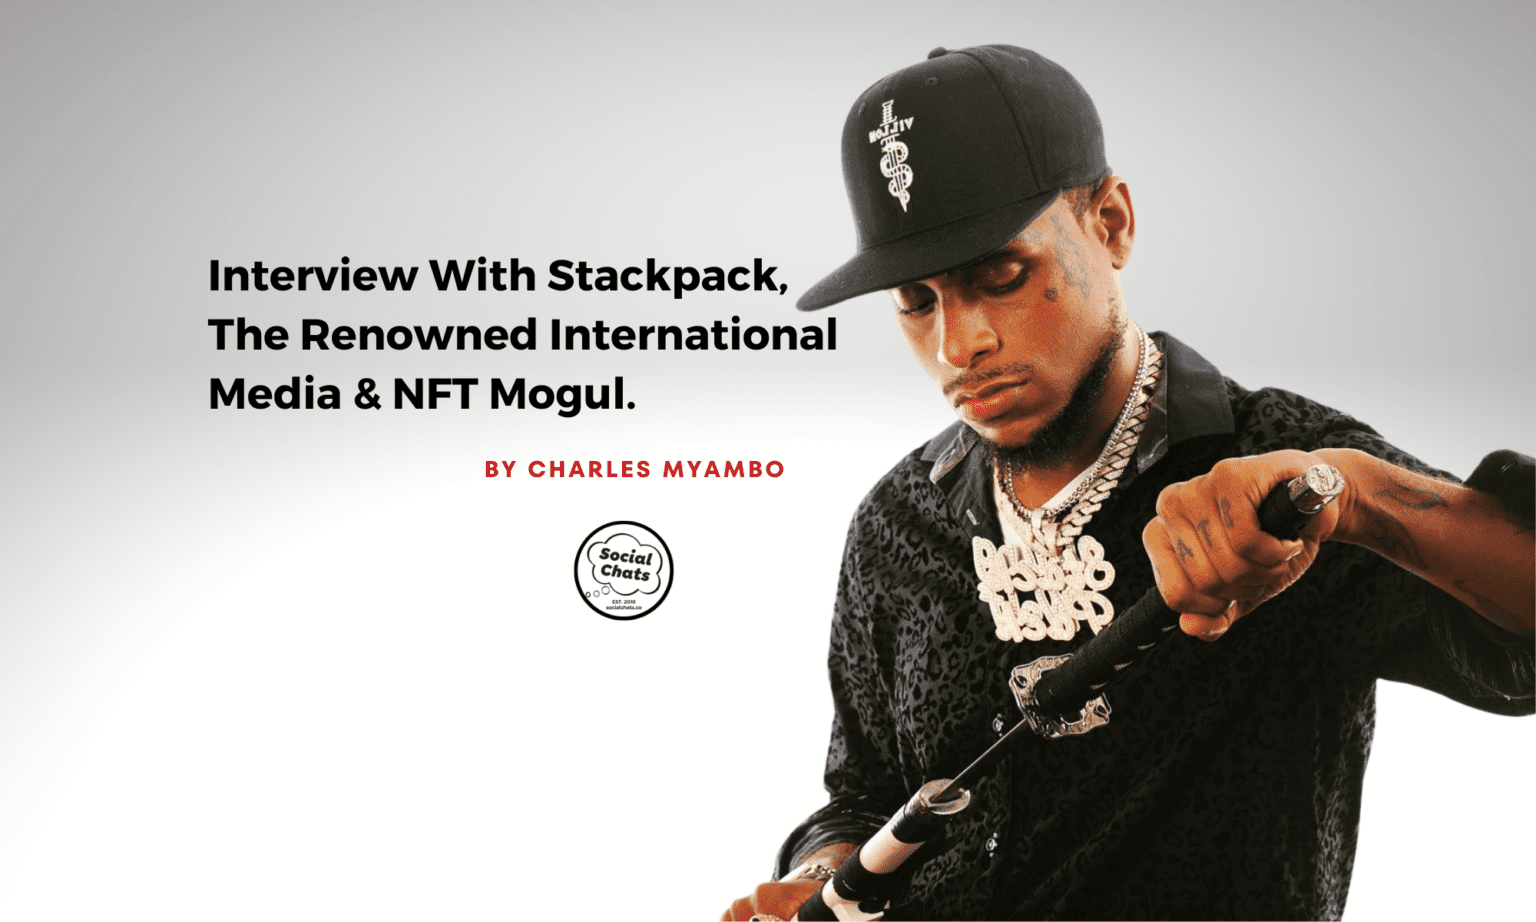 Interview With Stackpack, The Renowned International Media & NFT Mogul